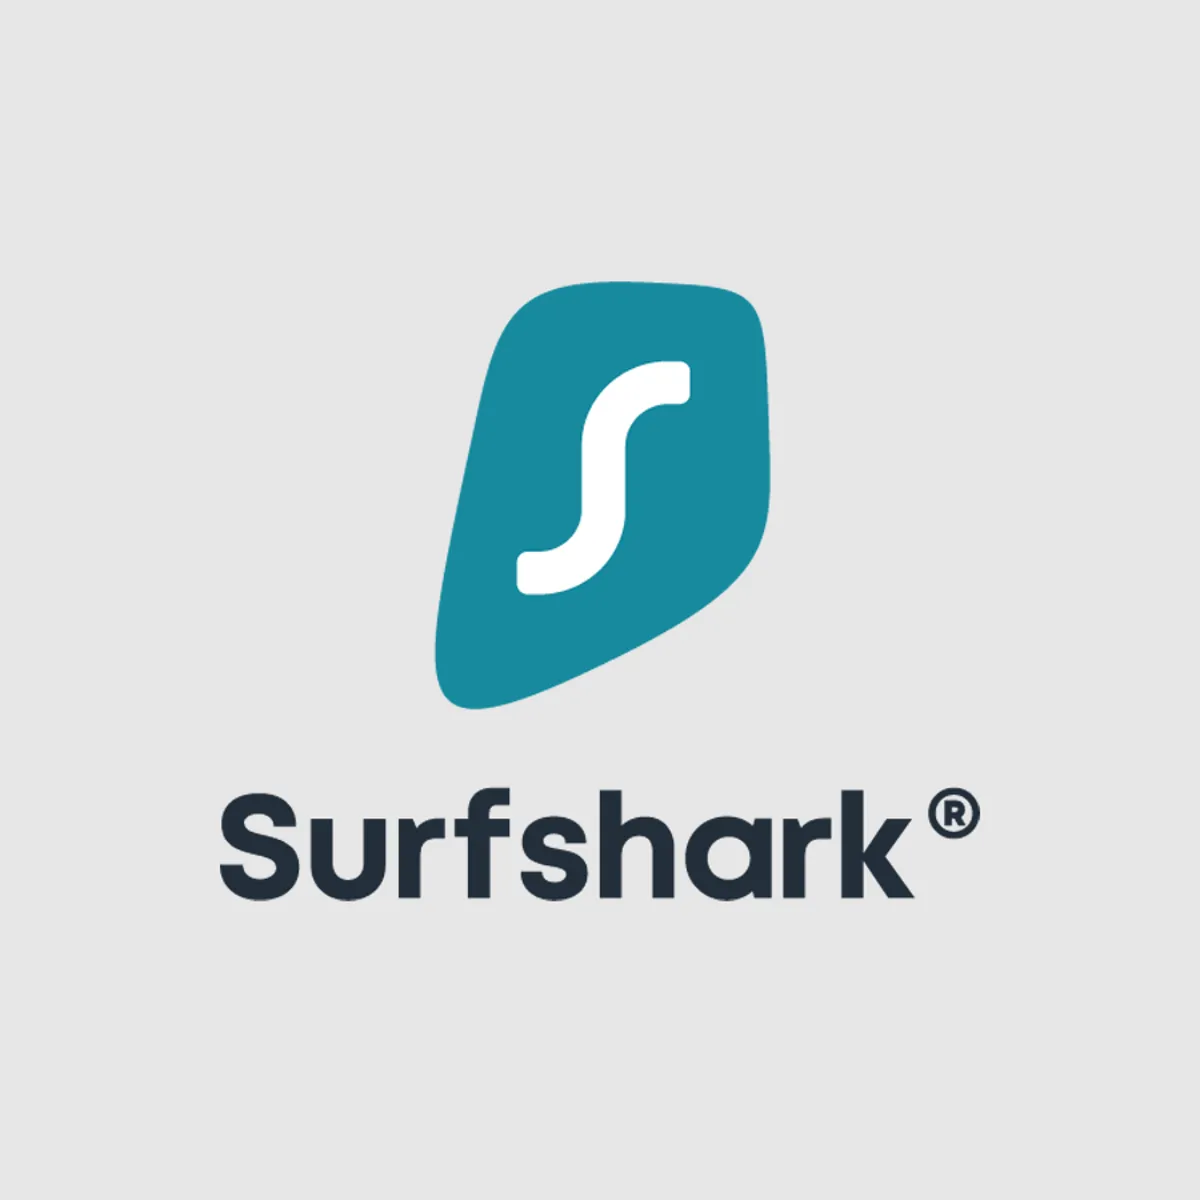 Watch FXNOW Outside the US with SurfShark